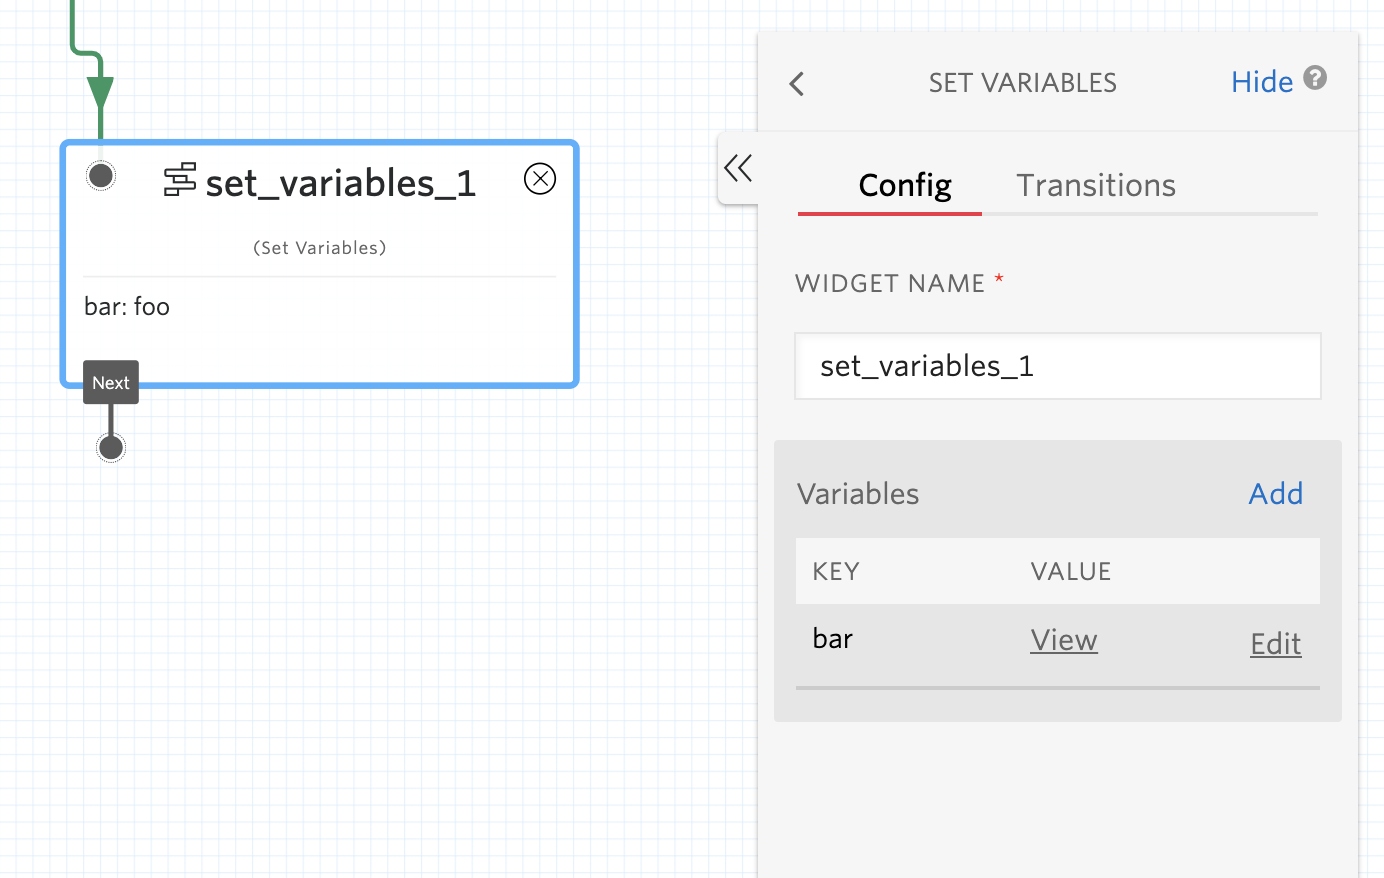 A simple Studio Set Variables widget, where the key is bar and value is foo.